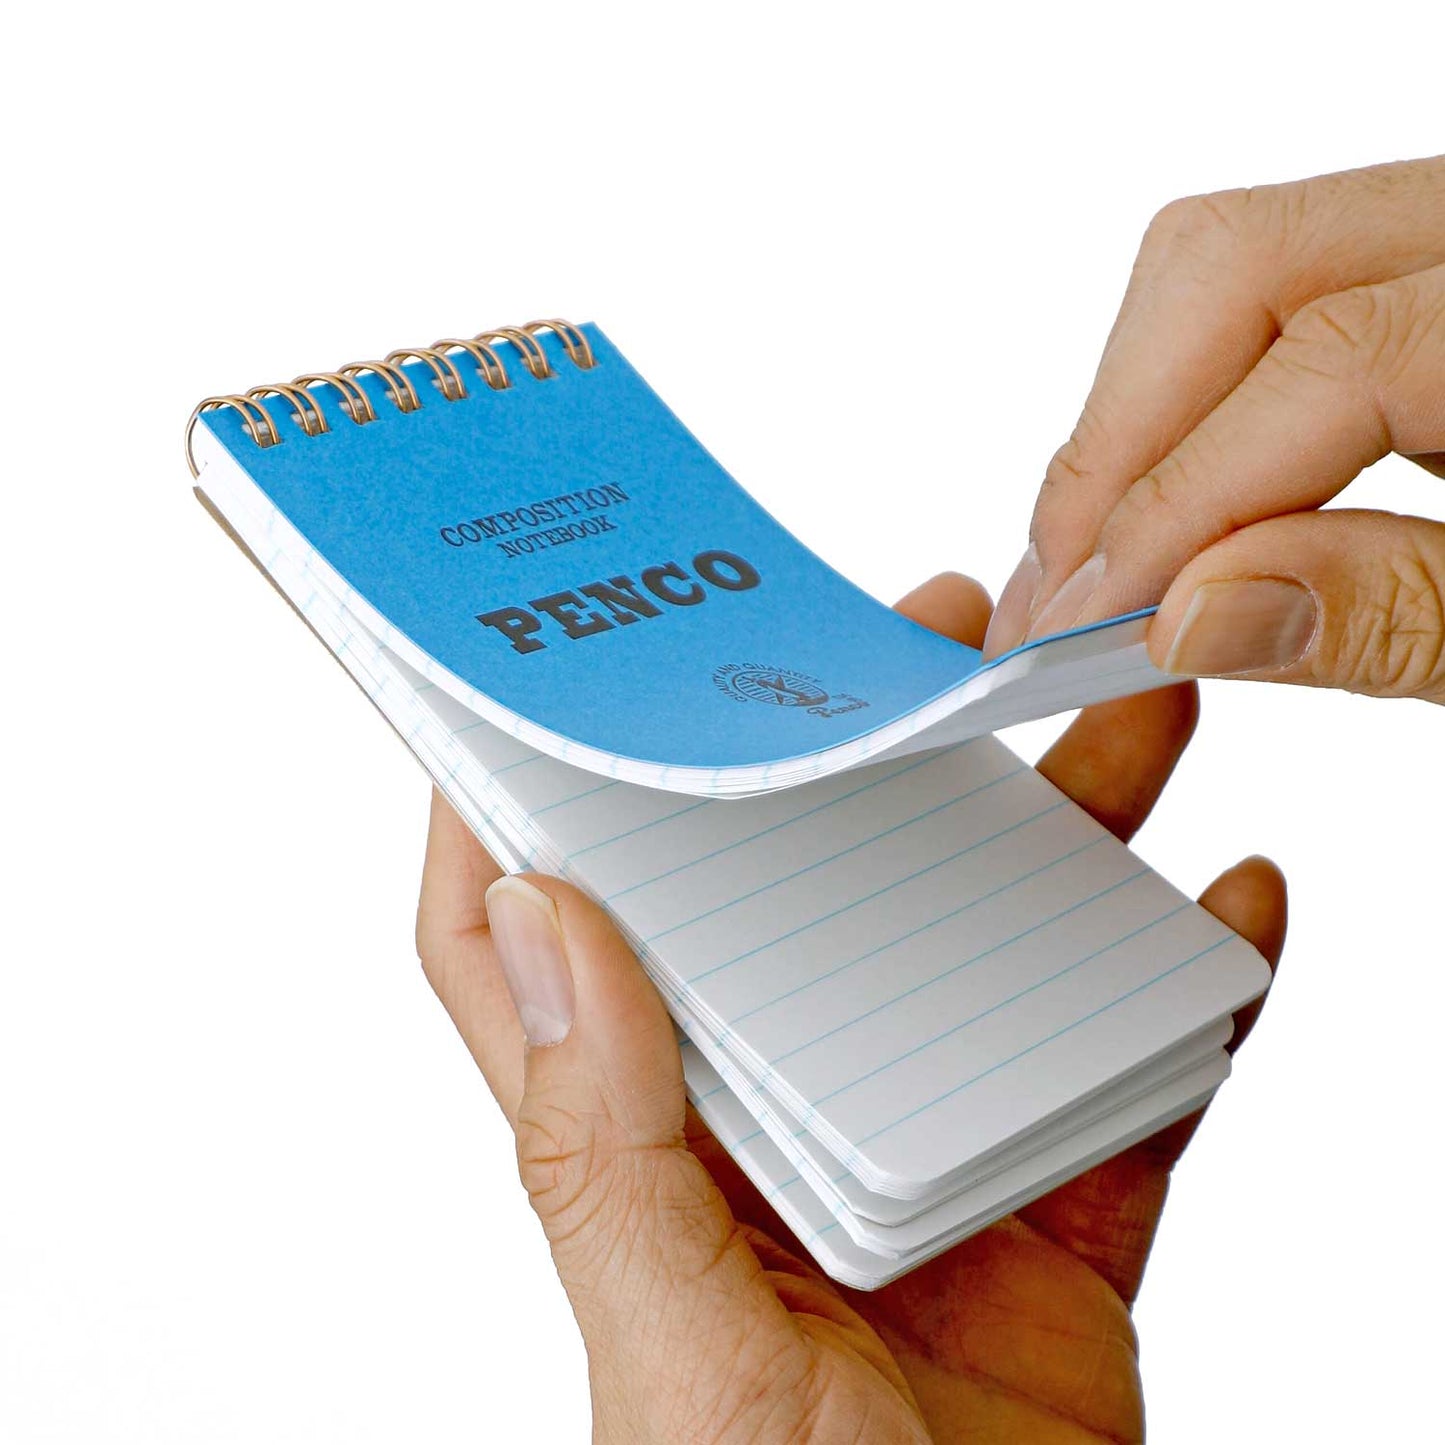 Coil Notepad (Penco) / S